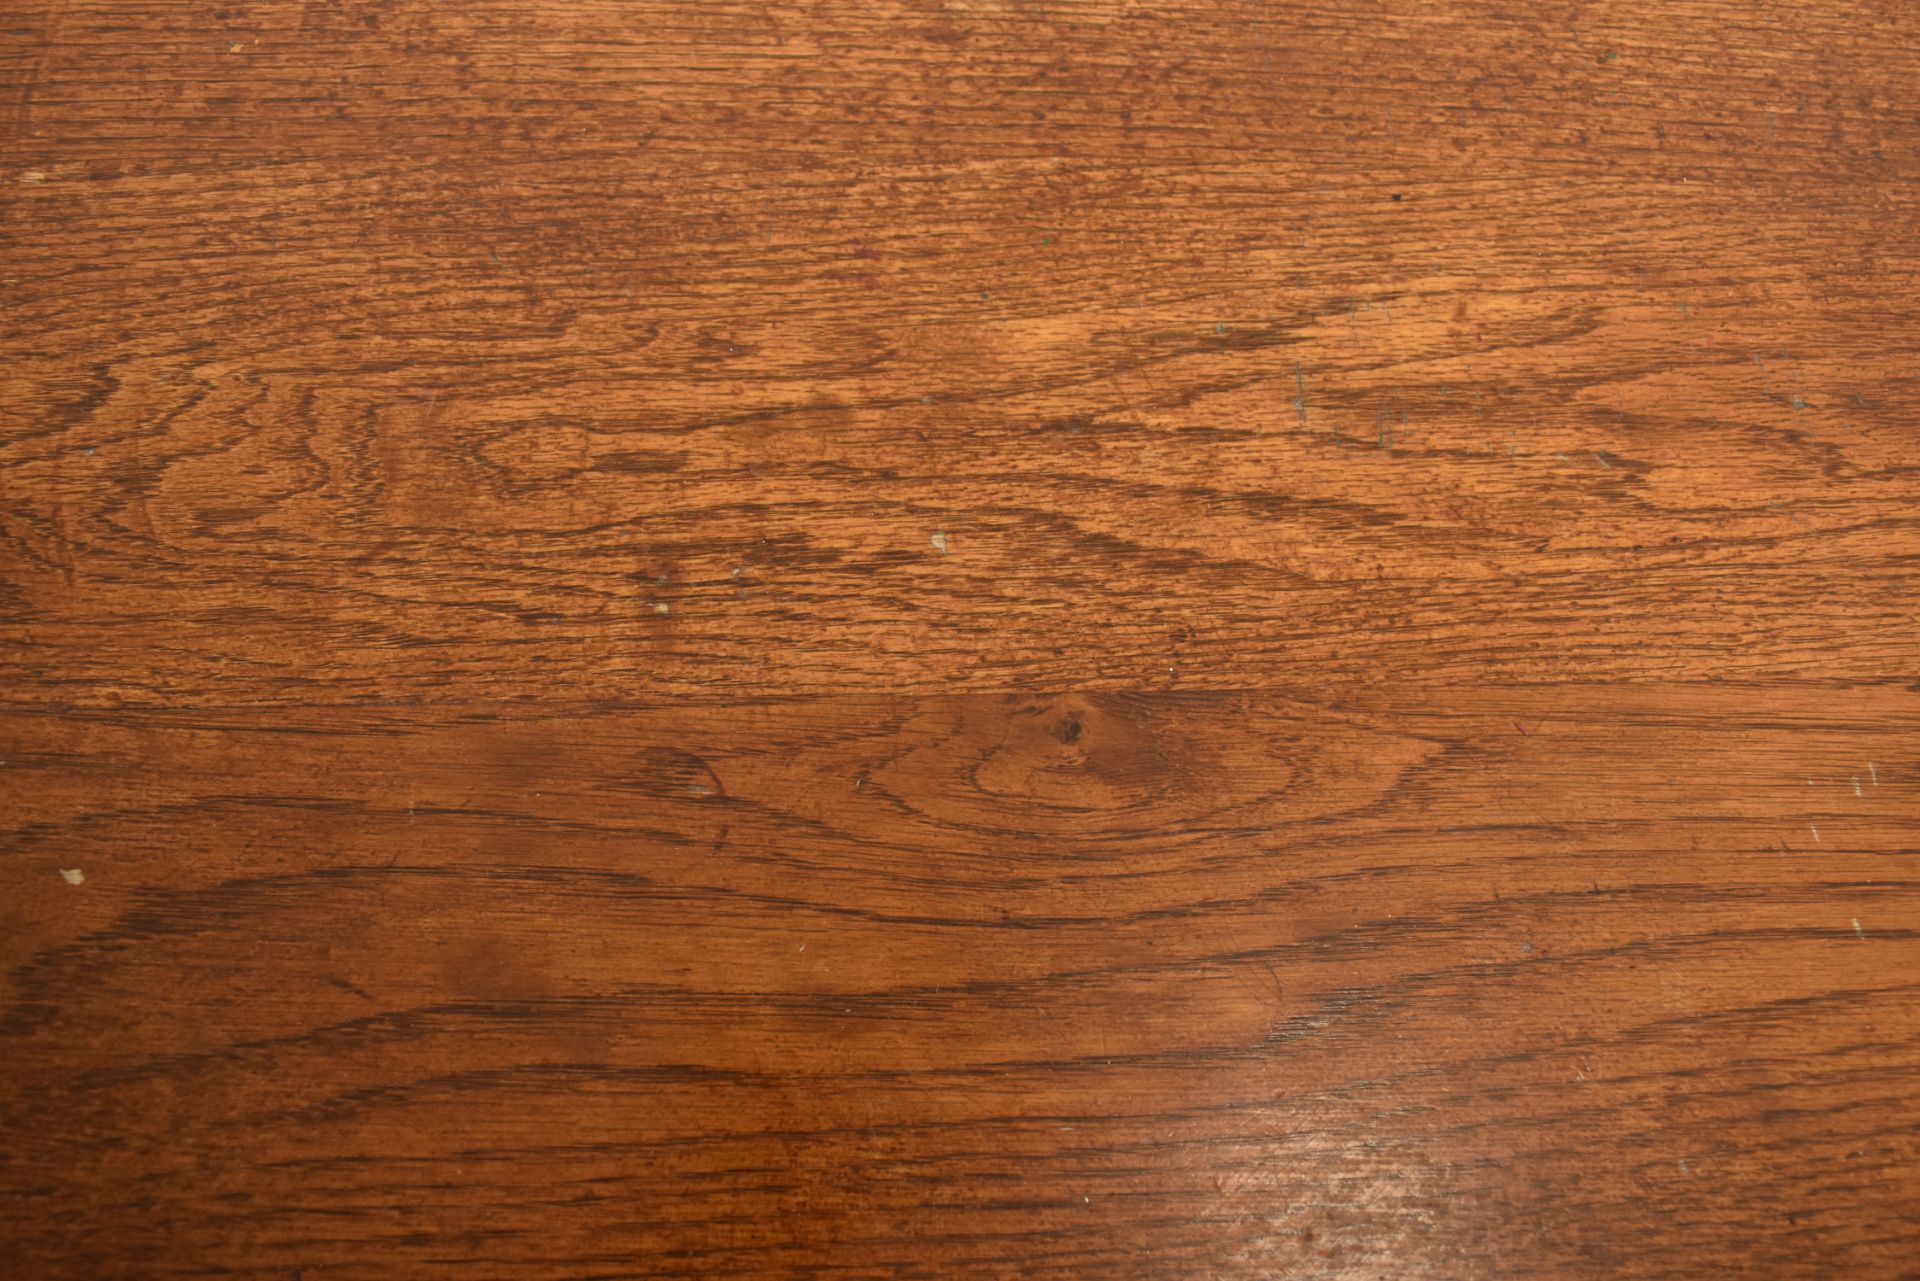 EARLY 20TH CENTURY ELM WOOD PLANK TOP REFECTORY TABLE - Image 6 of 6